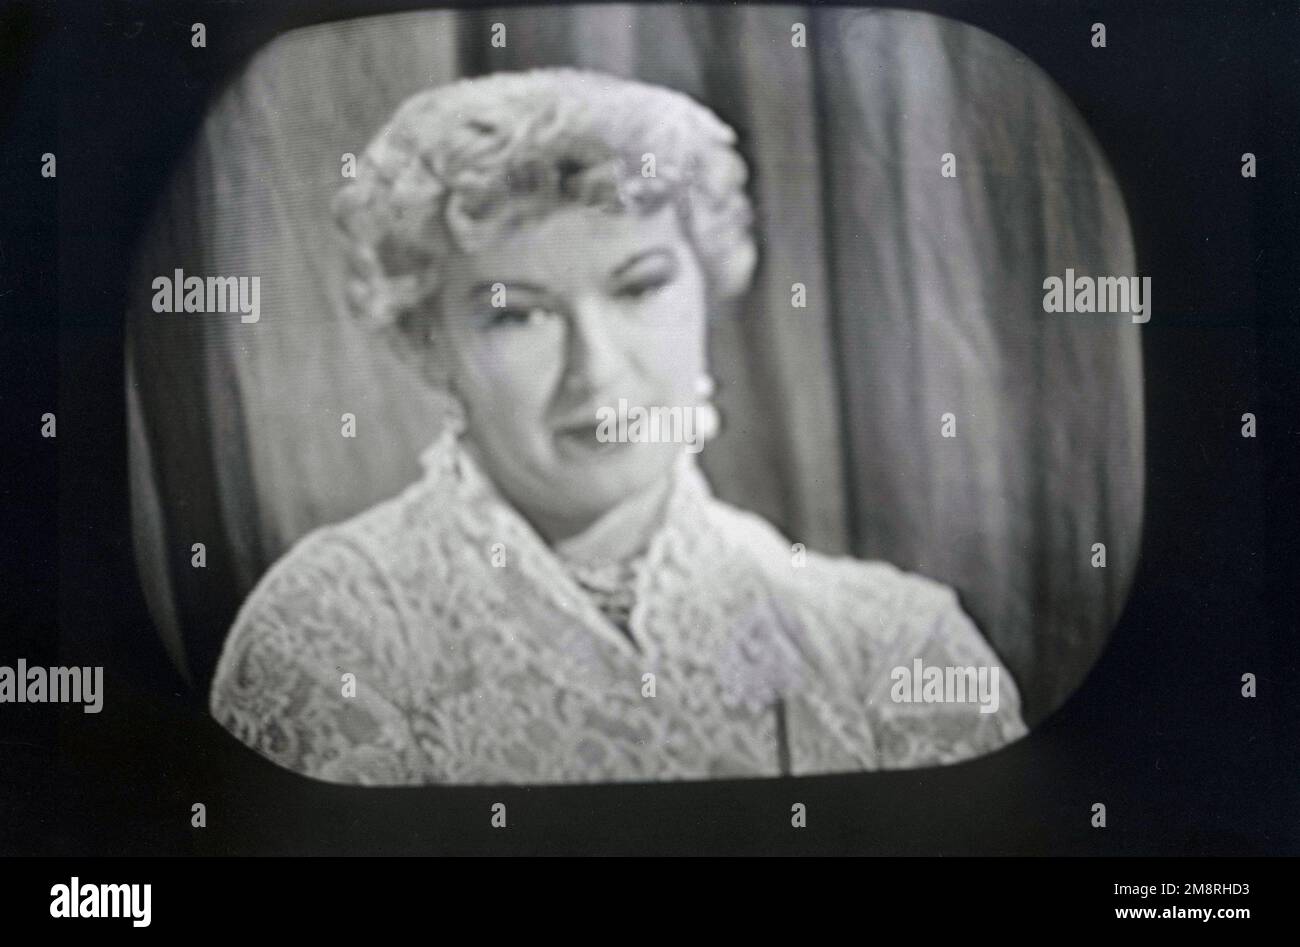 1957, historical, the actress Barbara Kelly on BBC Television appearing in the British game show, What's My Line?. Broadcast on BBC television from 1951 to 1963, the panel game show was based on the US version of the same name, and was one of most popular television programmes of the era. The show's panelists had to question contestants to try and guess their occupation, i.e their 'line of work'. Born in Vancover, Canada, Barbara Kelly was one of the regualr panelists on the original BBC series. Stock Photo